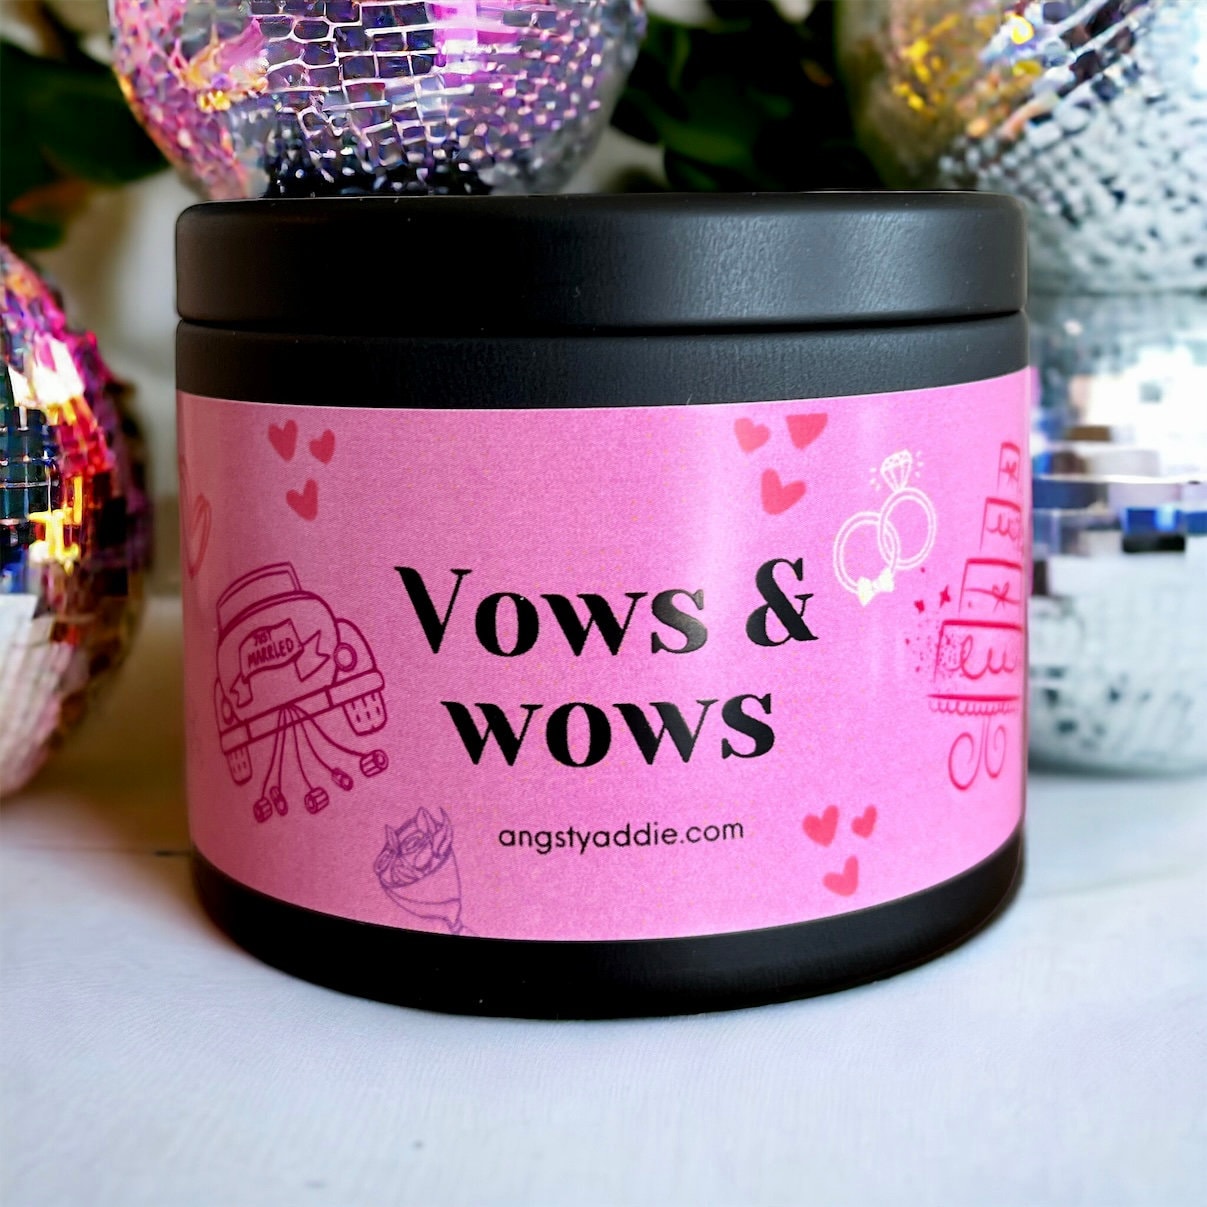 Vows + Wows bridal shower favors